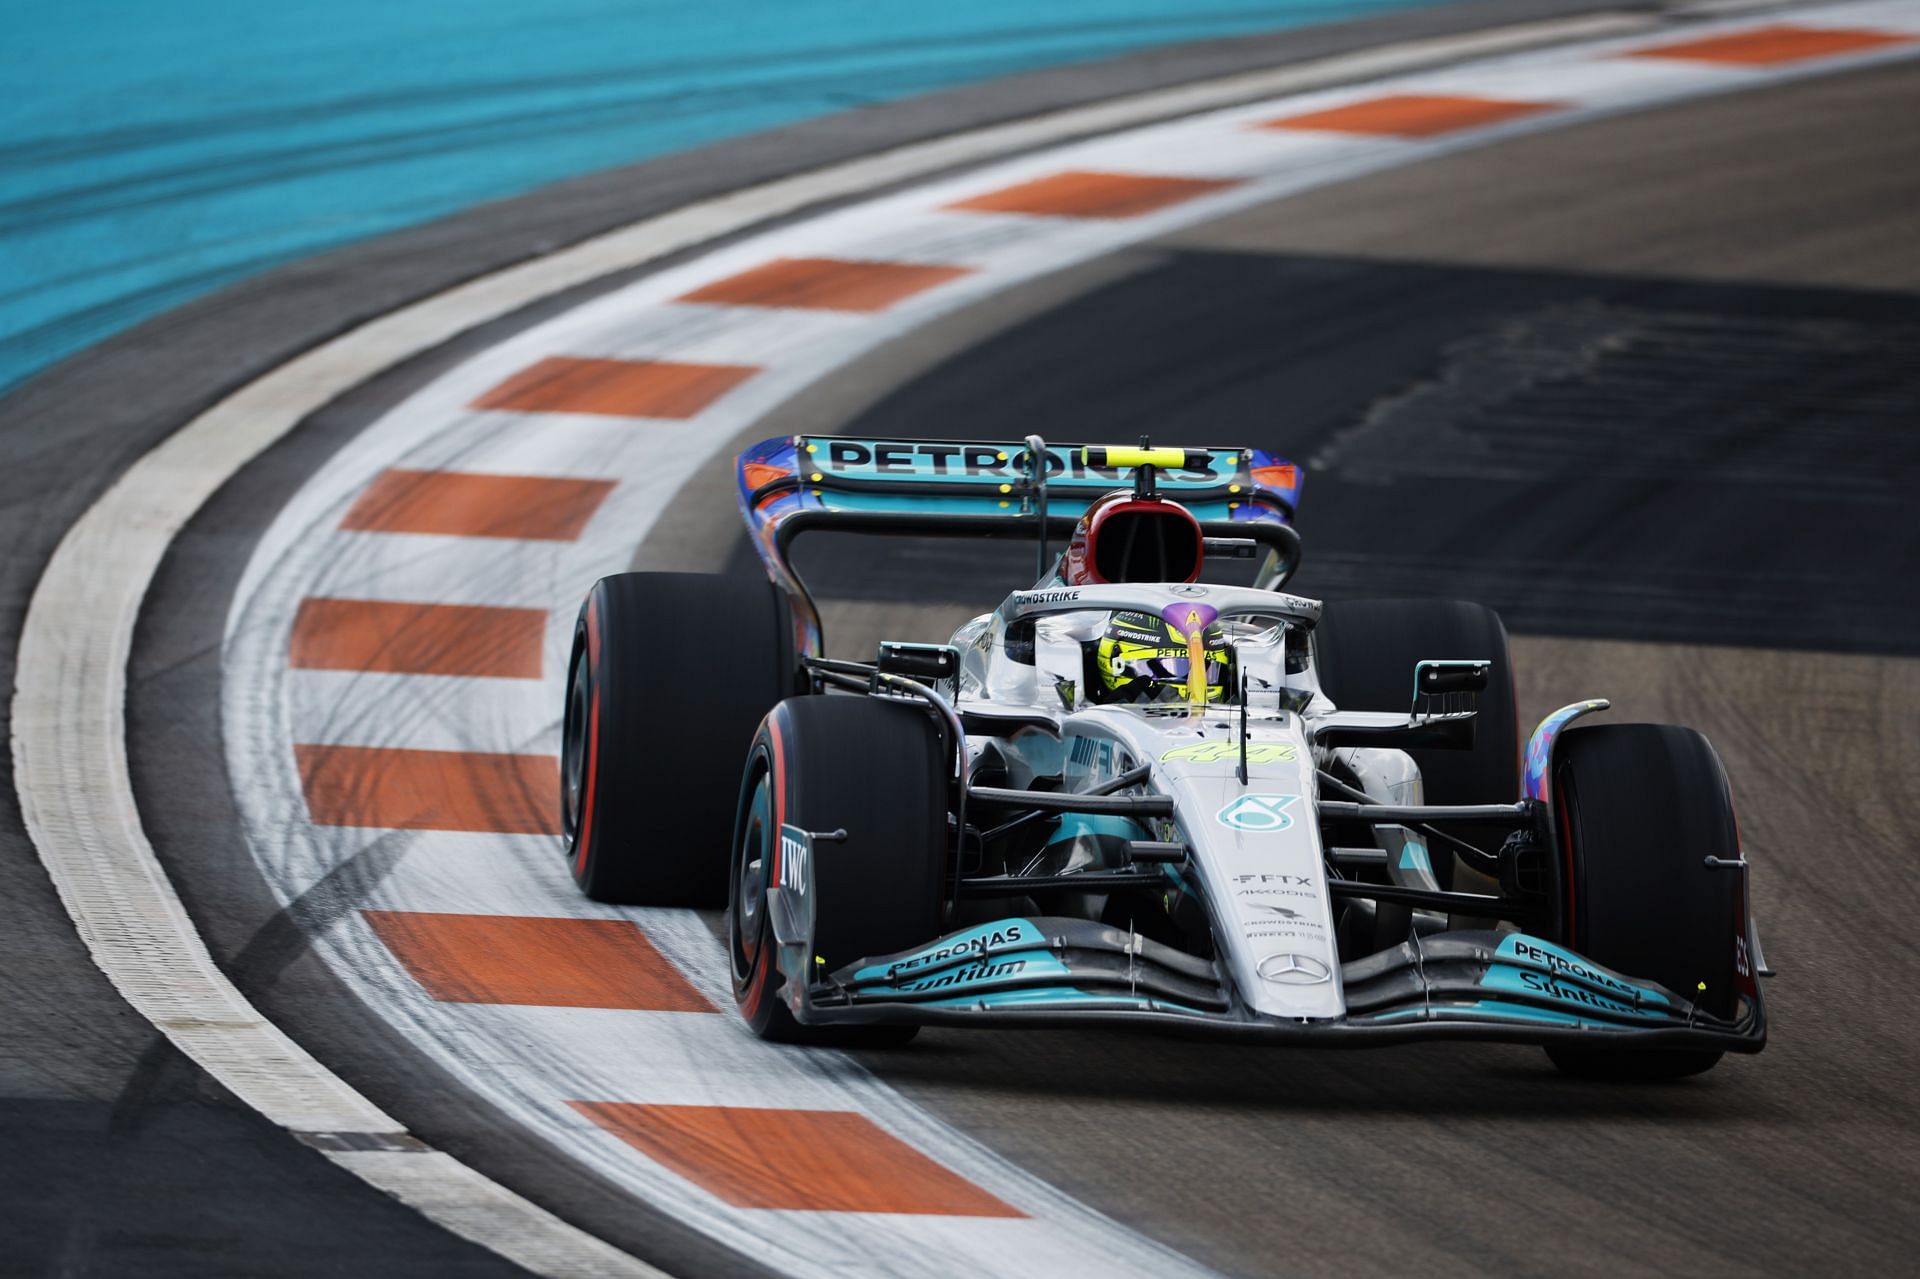 Mercedes seems to have unlocked some more performance from the car in Miami